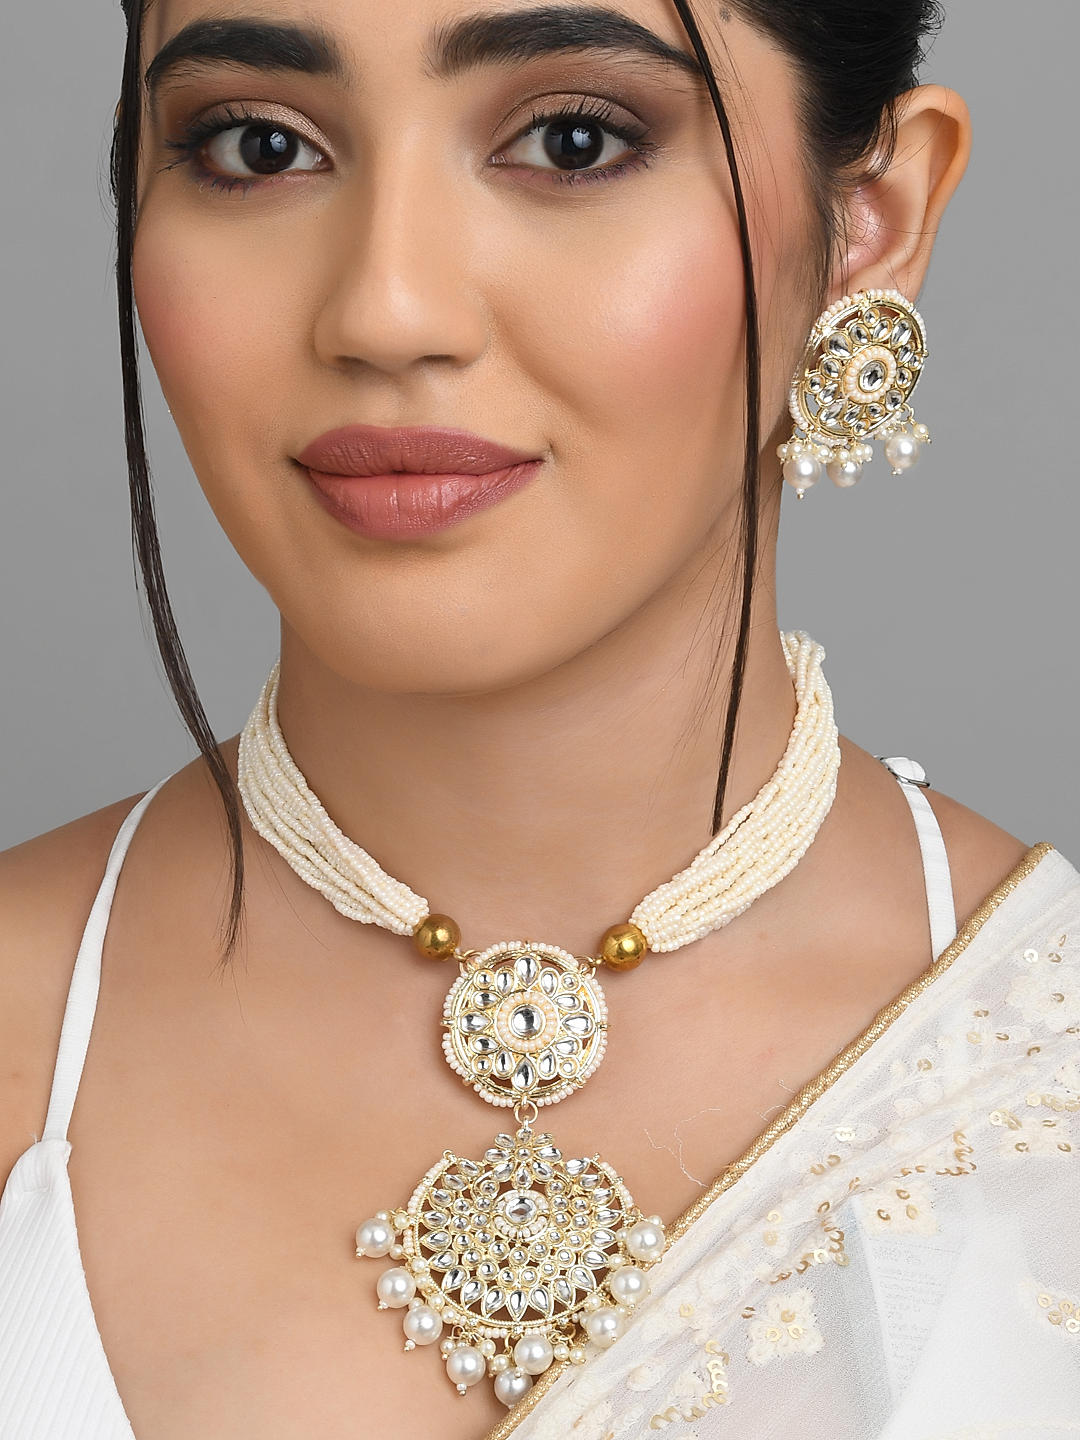 Tips to Keep in Mind While Buying Indian Style Earrings